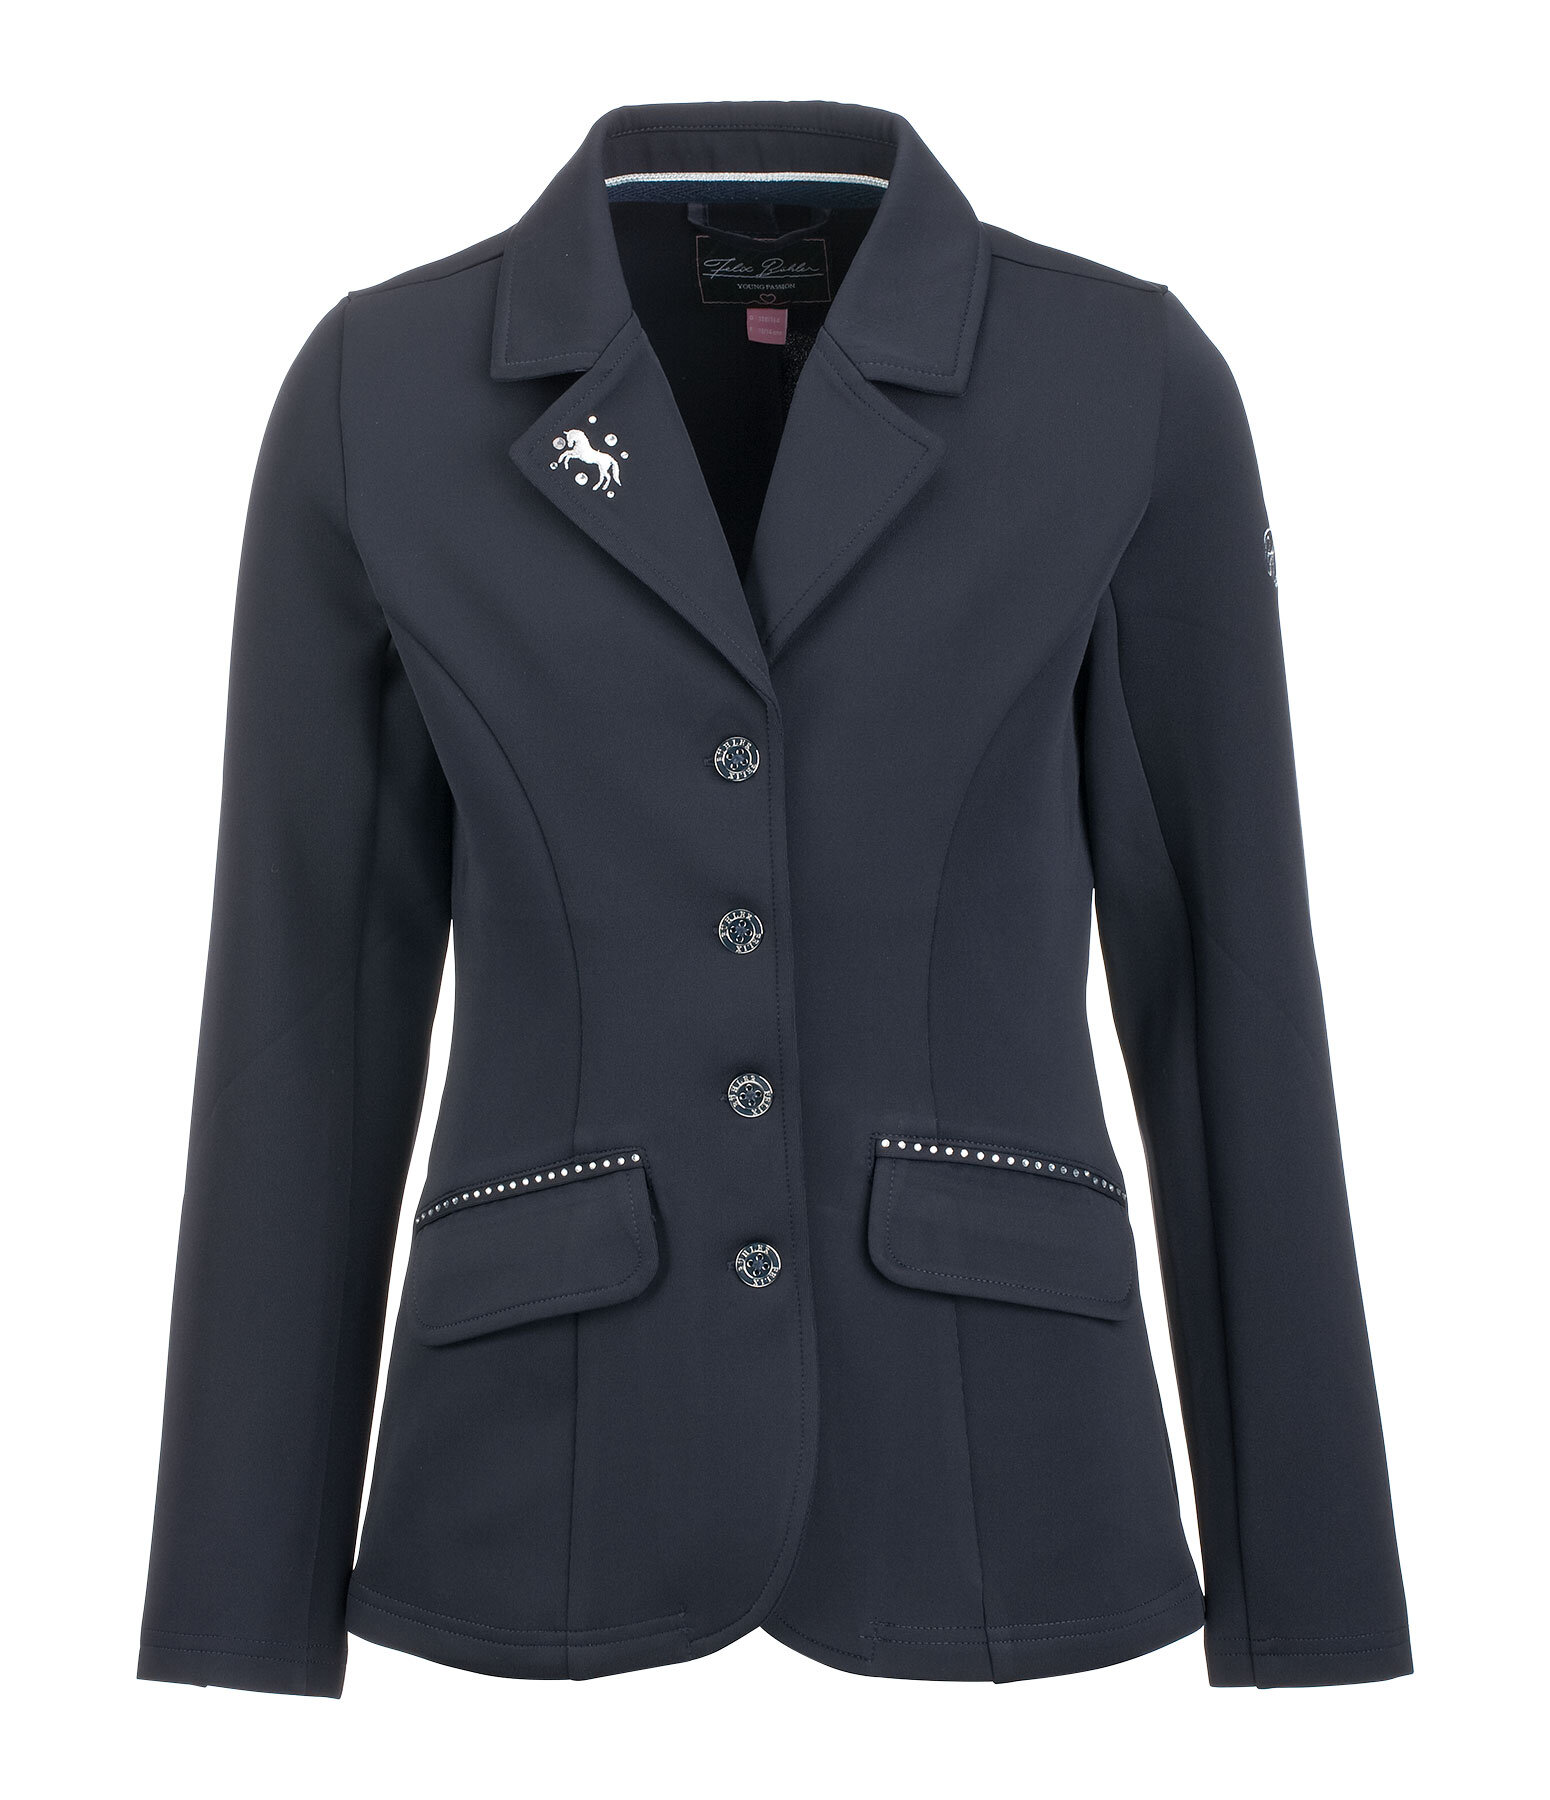 Children's Functional Competition Jacket Rosalie